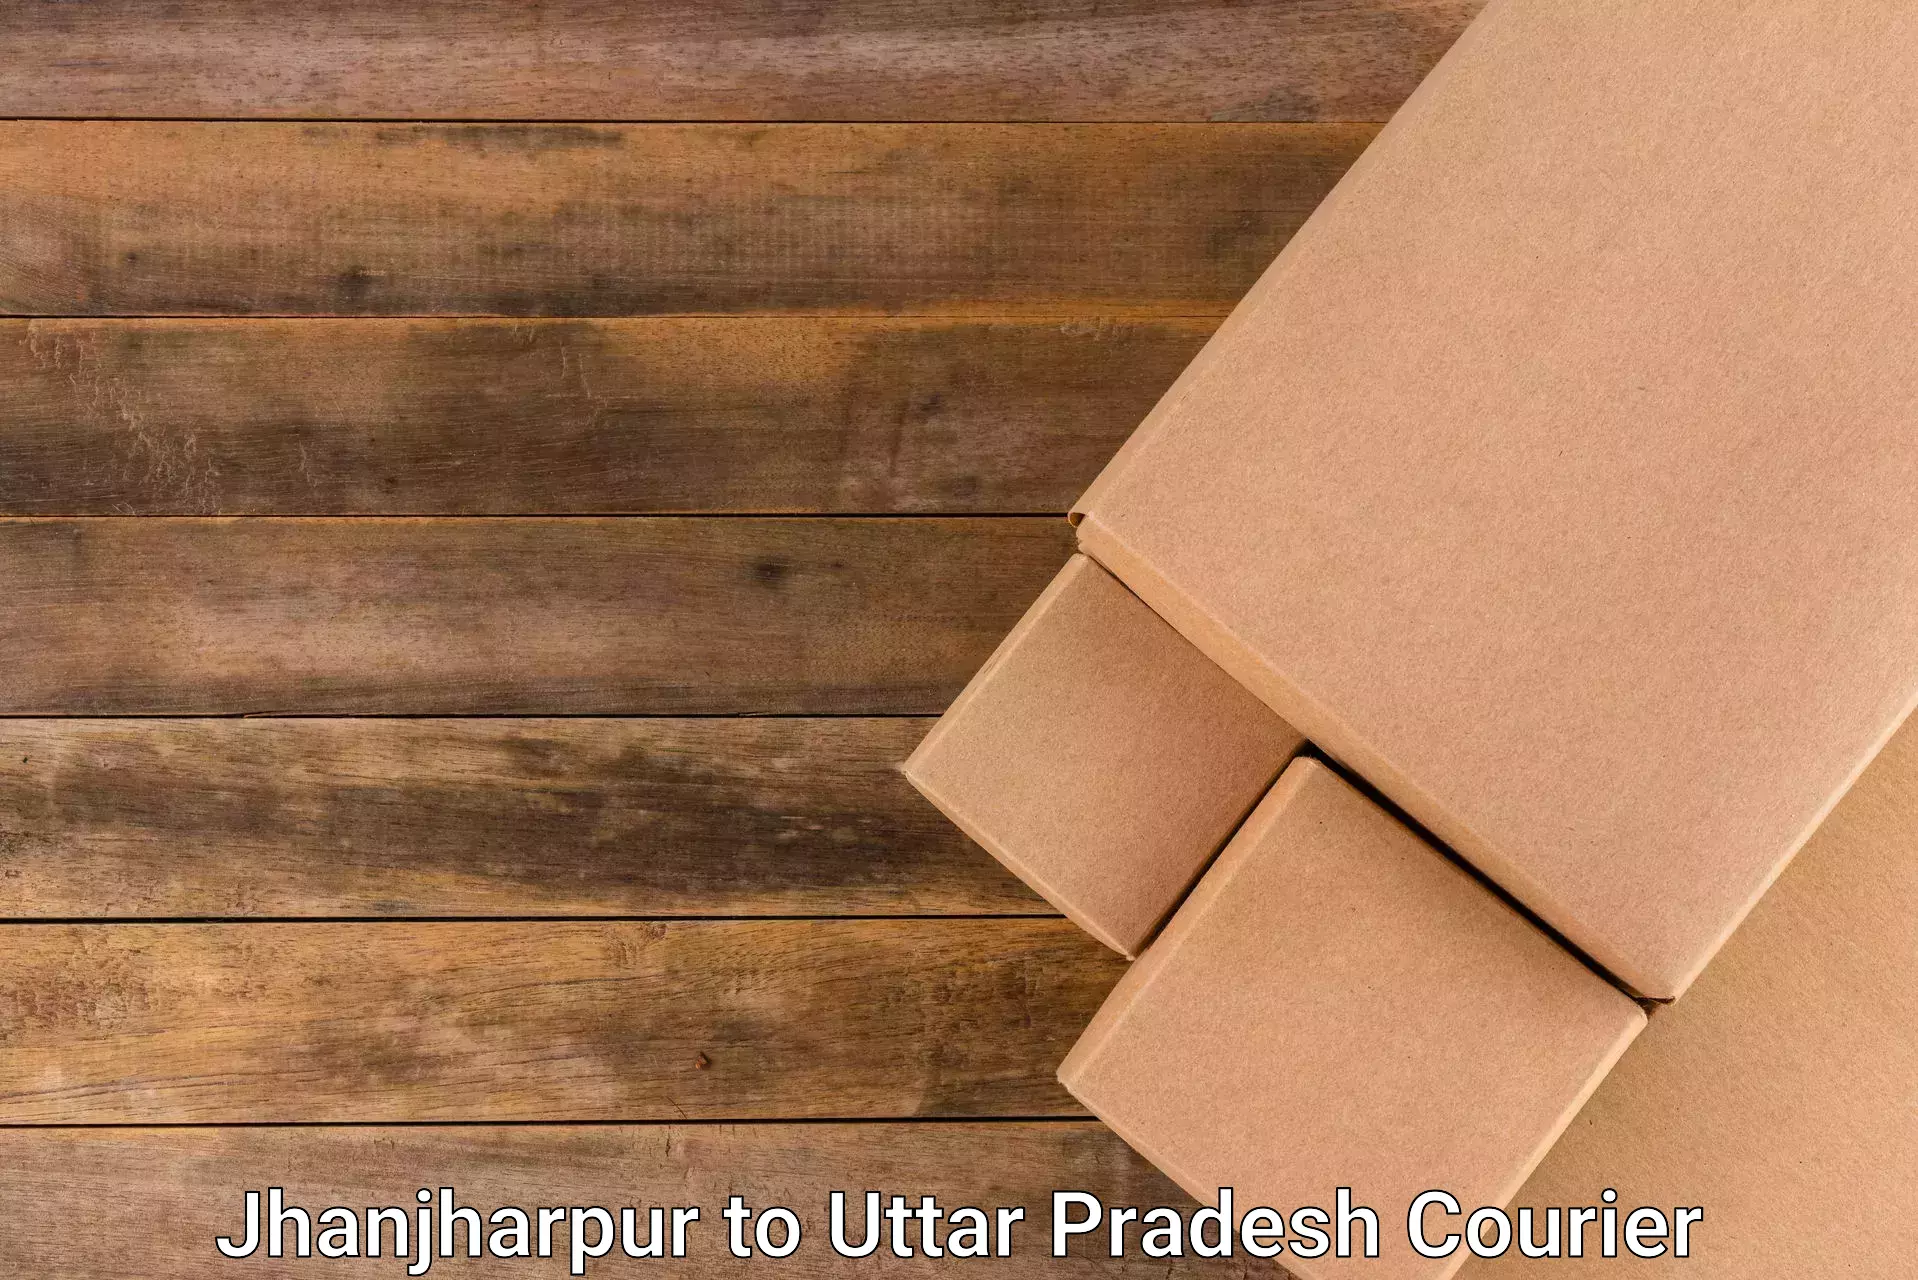 Full-service courier options Jhanjharpur to Ghatampur